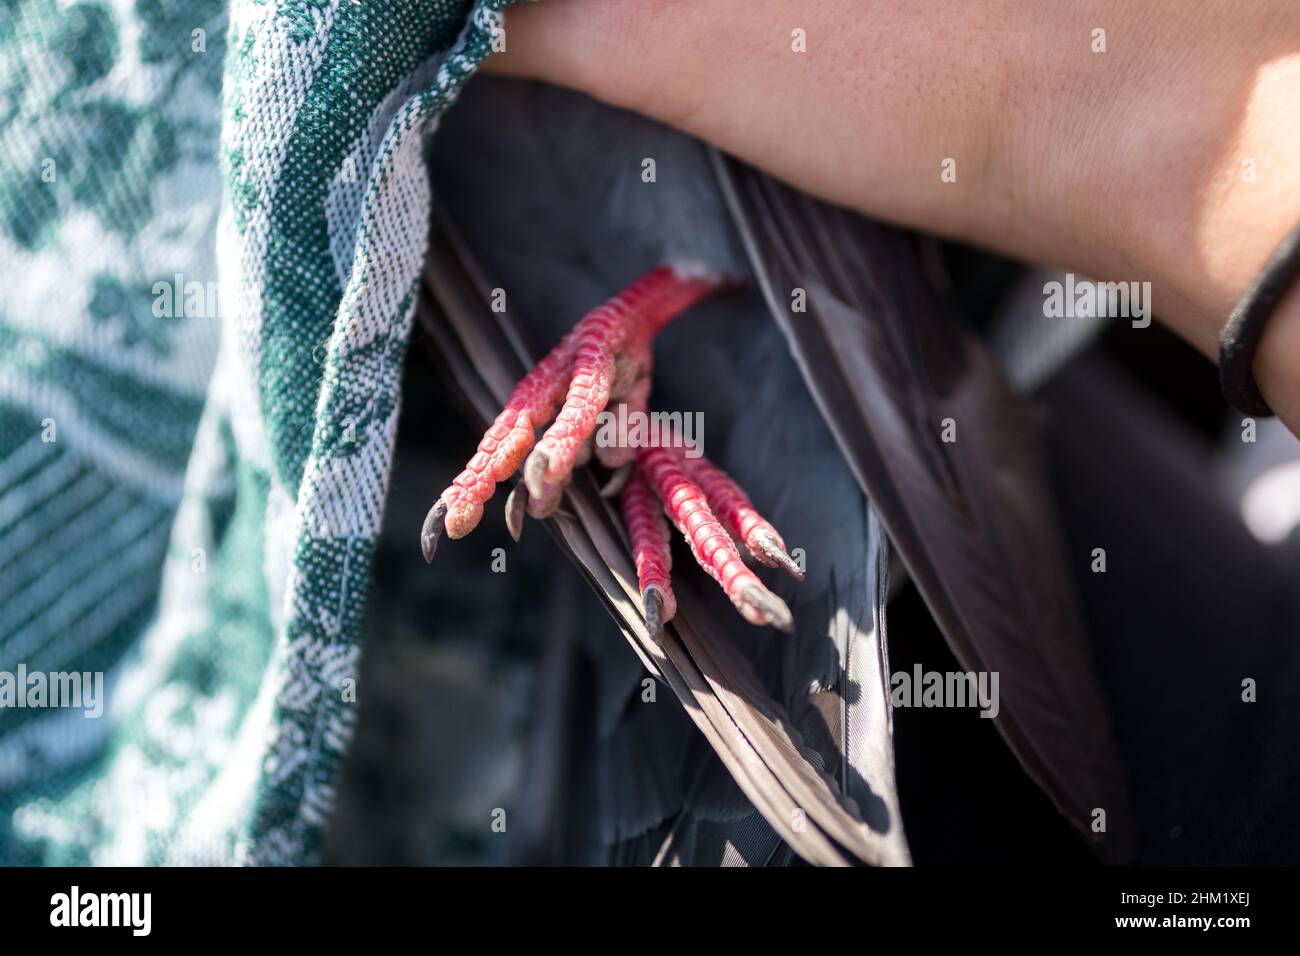 Rescuing a pigeon with a tangled string in his claw. Stock Photo